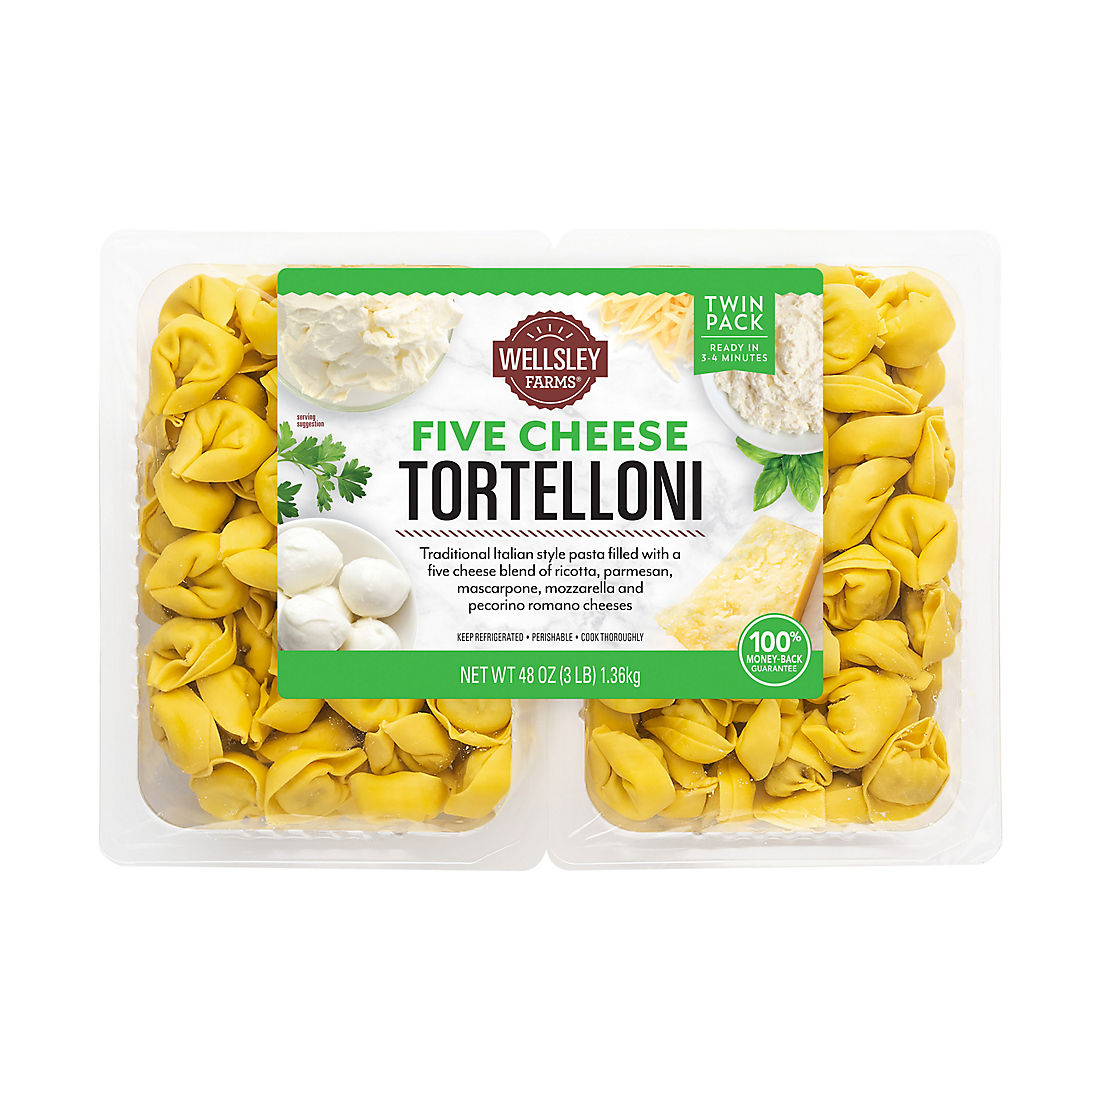 How To Cook Wellsley Farms Tortellini